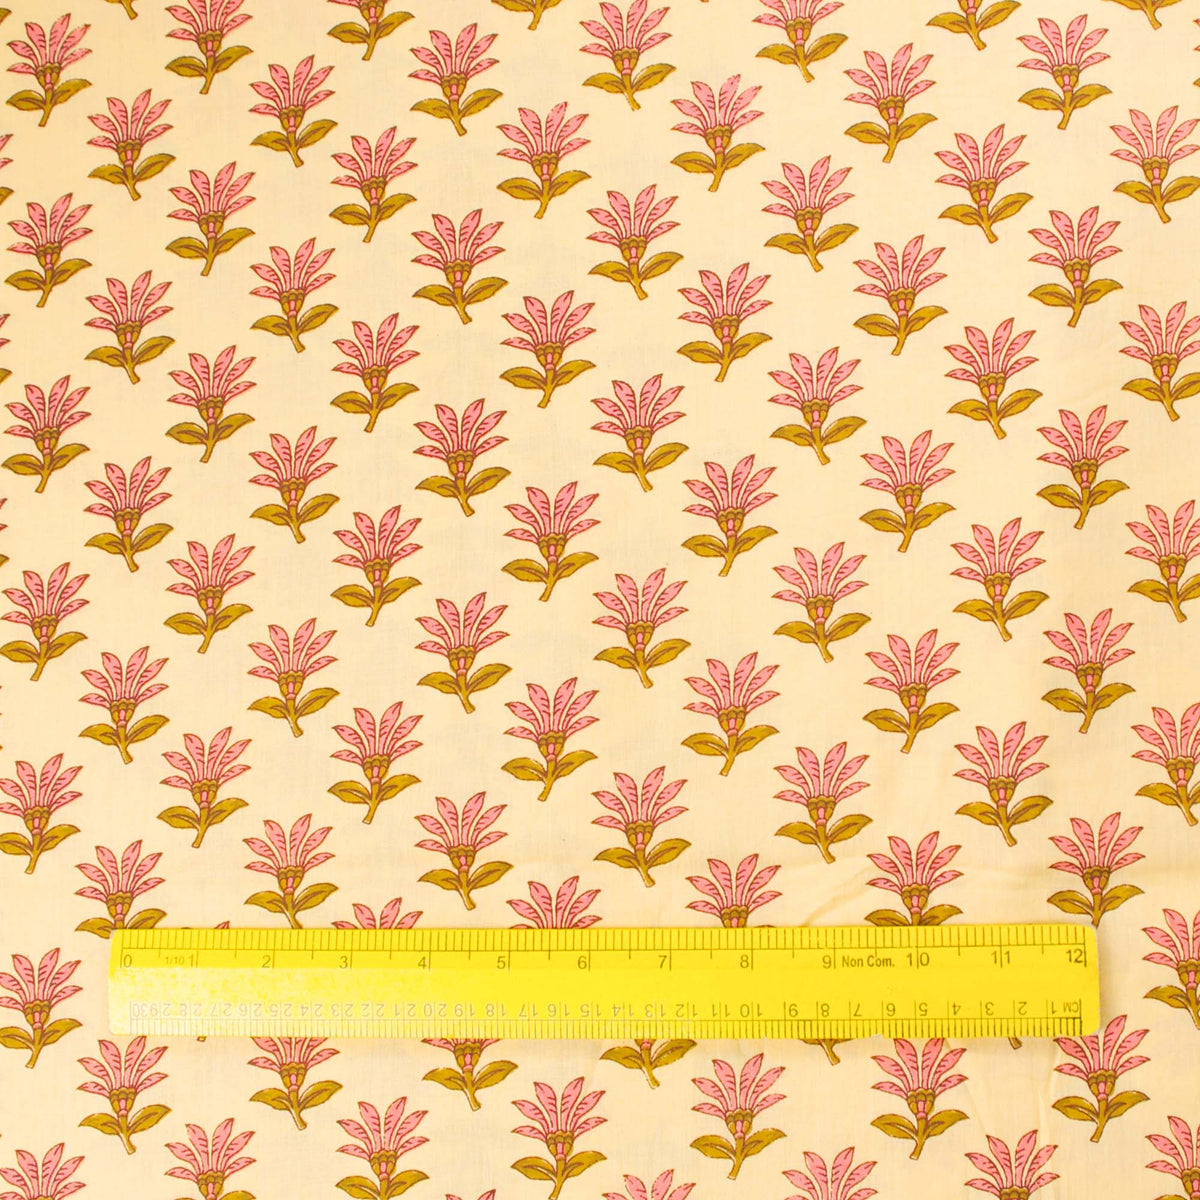 Hand Screen Printed 100% Cotton Fabric - Pink Floral Buti On Beige (Design 373)